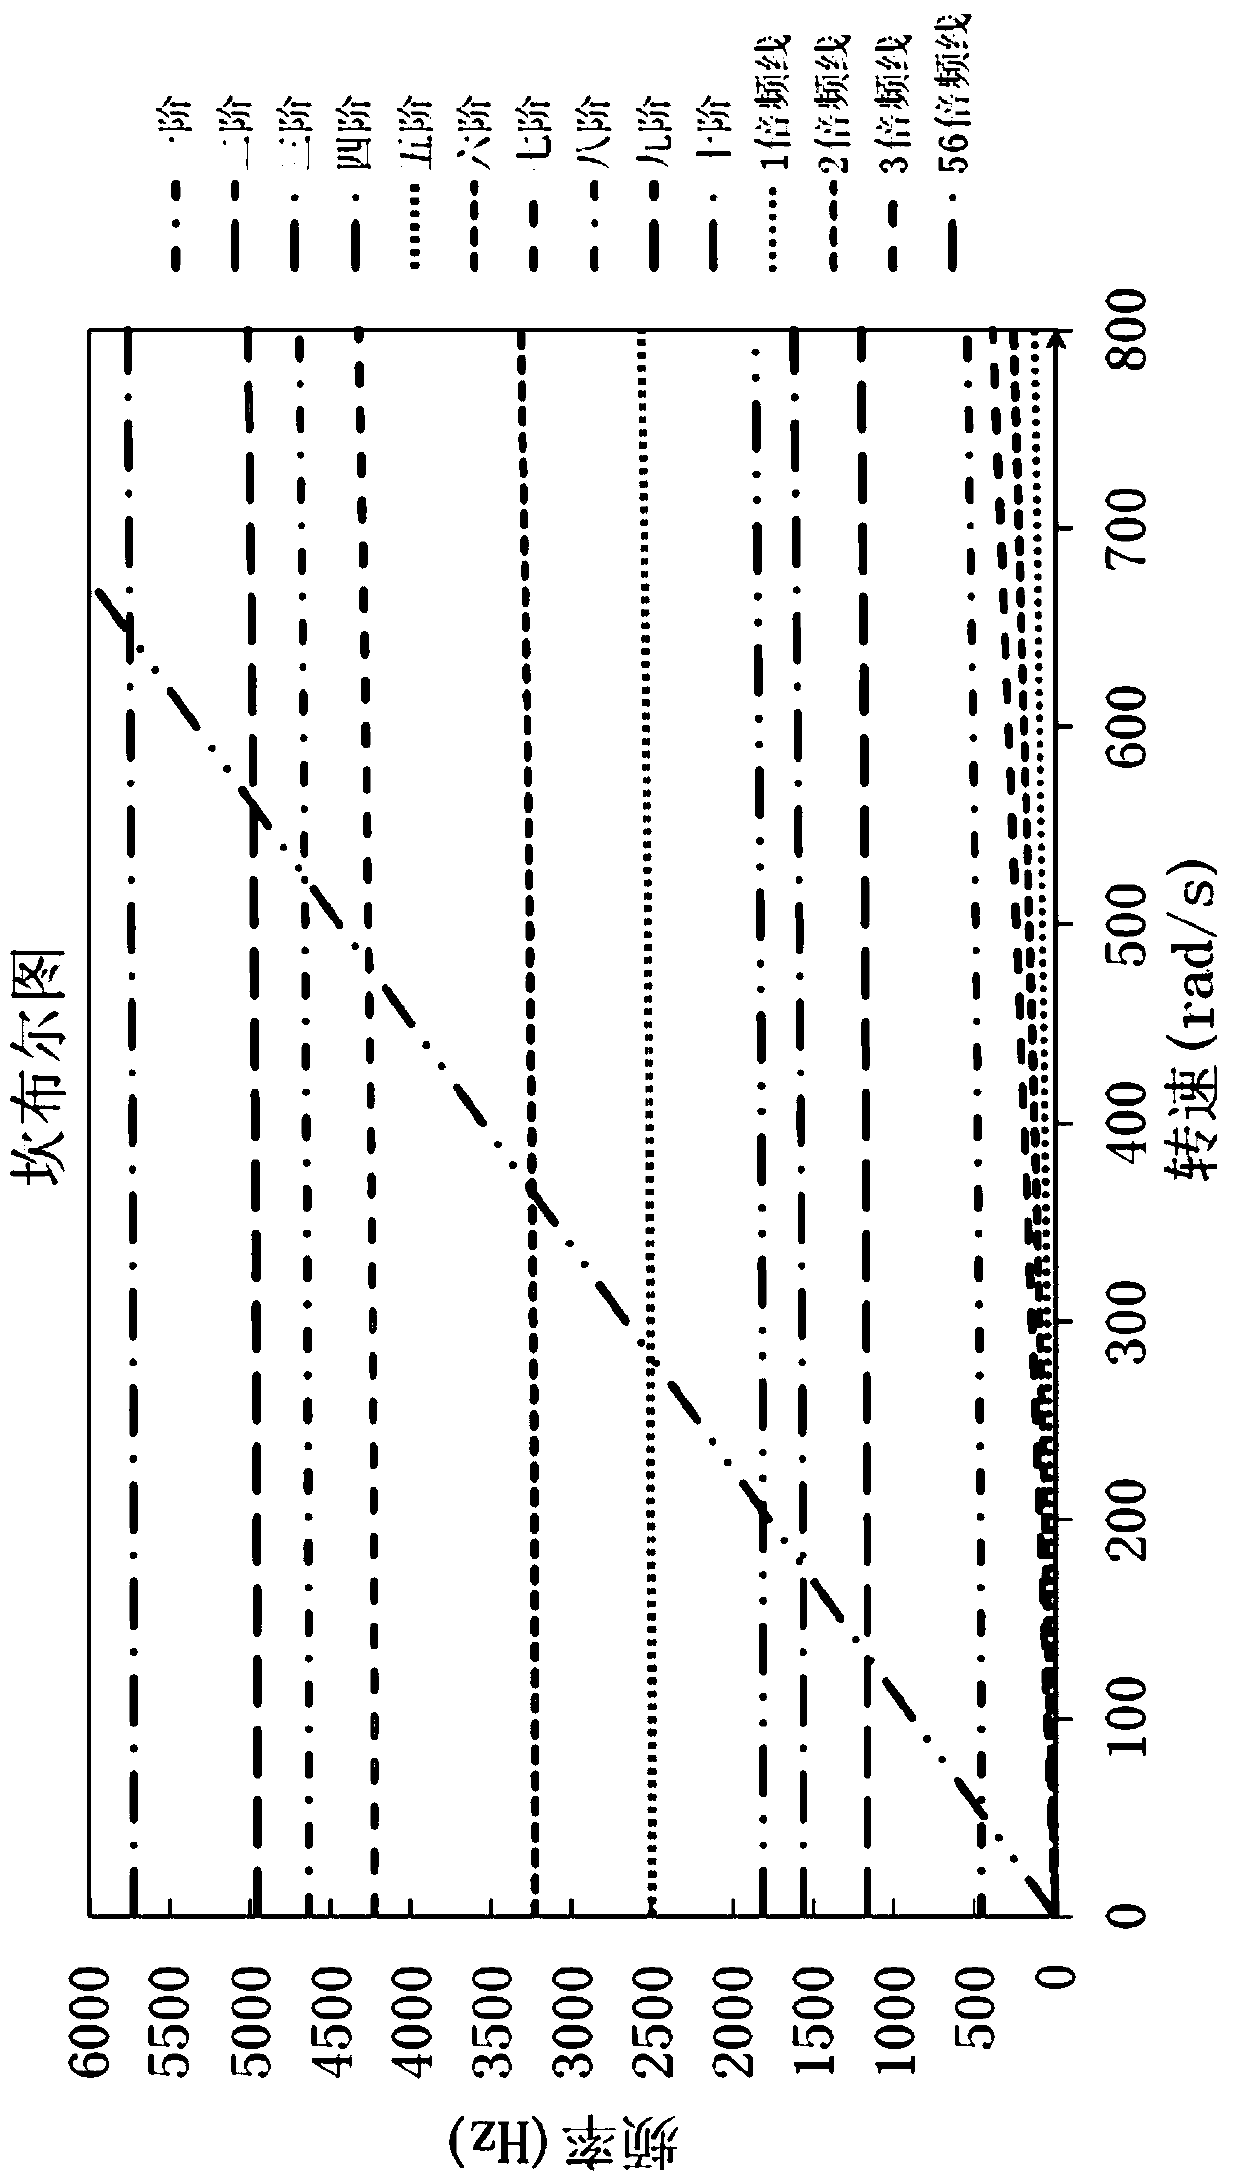 A Design Method for Vibration Reliability of Turbine Blisk Structure